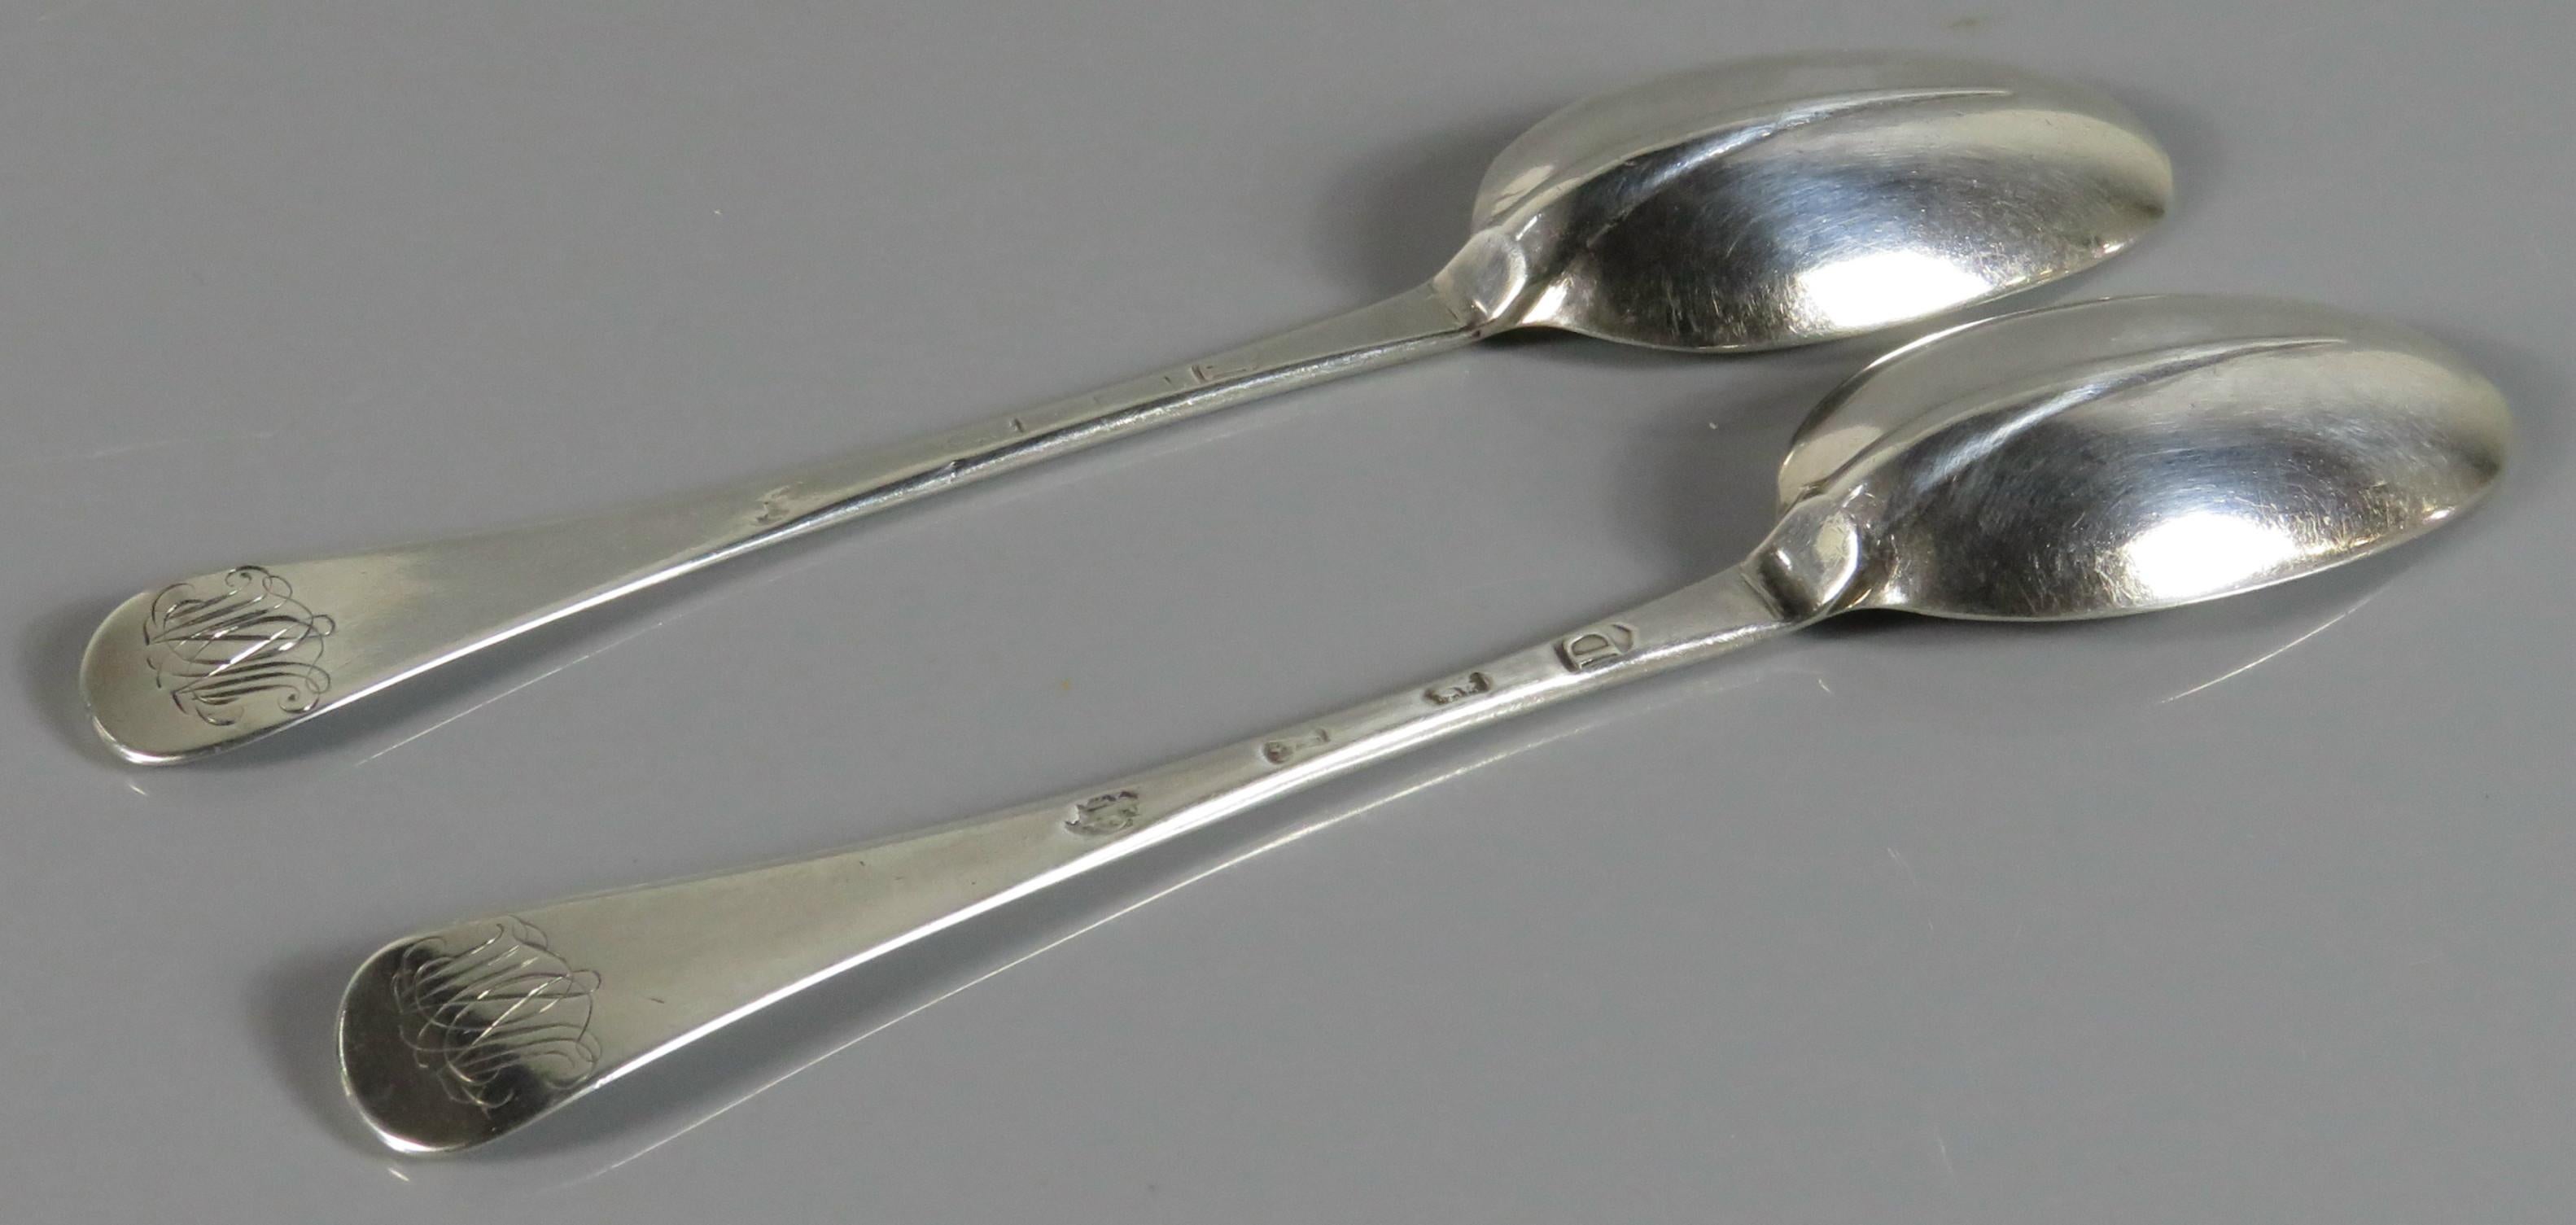 A rare pair of George I Britannia Standard Silver (.958 fine) Hanoverian ‘Rat-Tail’ tablespoons. 
The underside of the bowls showing a 'rat tail' heel, the stem stamped with London hallmarks with date letter for 1719, maker’s marks